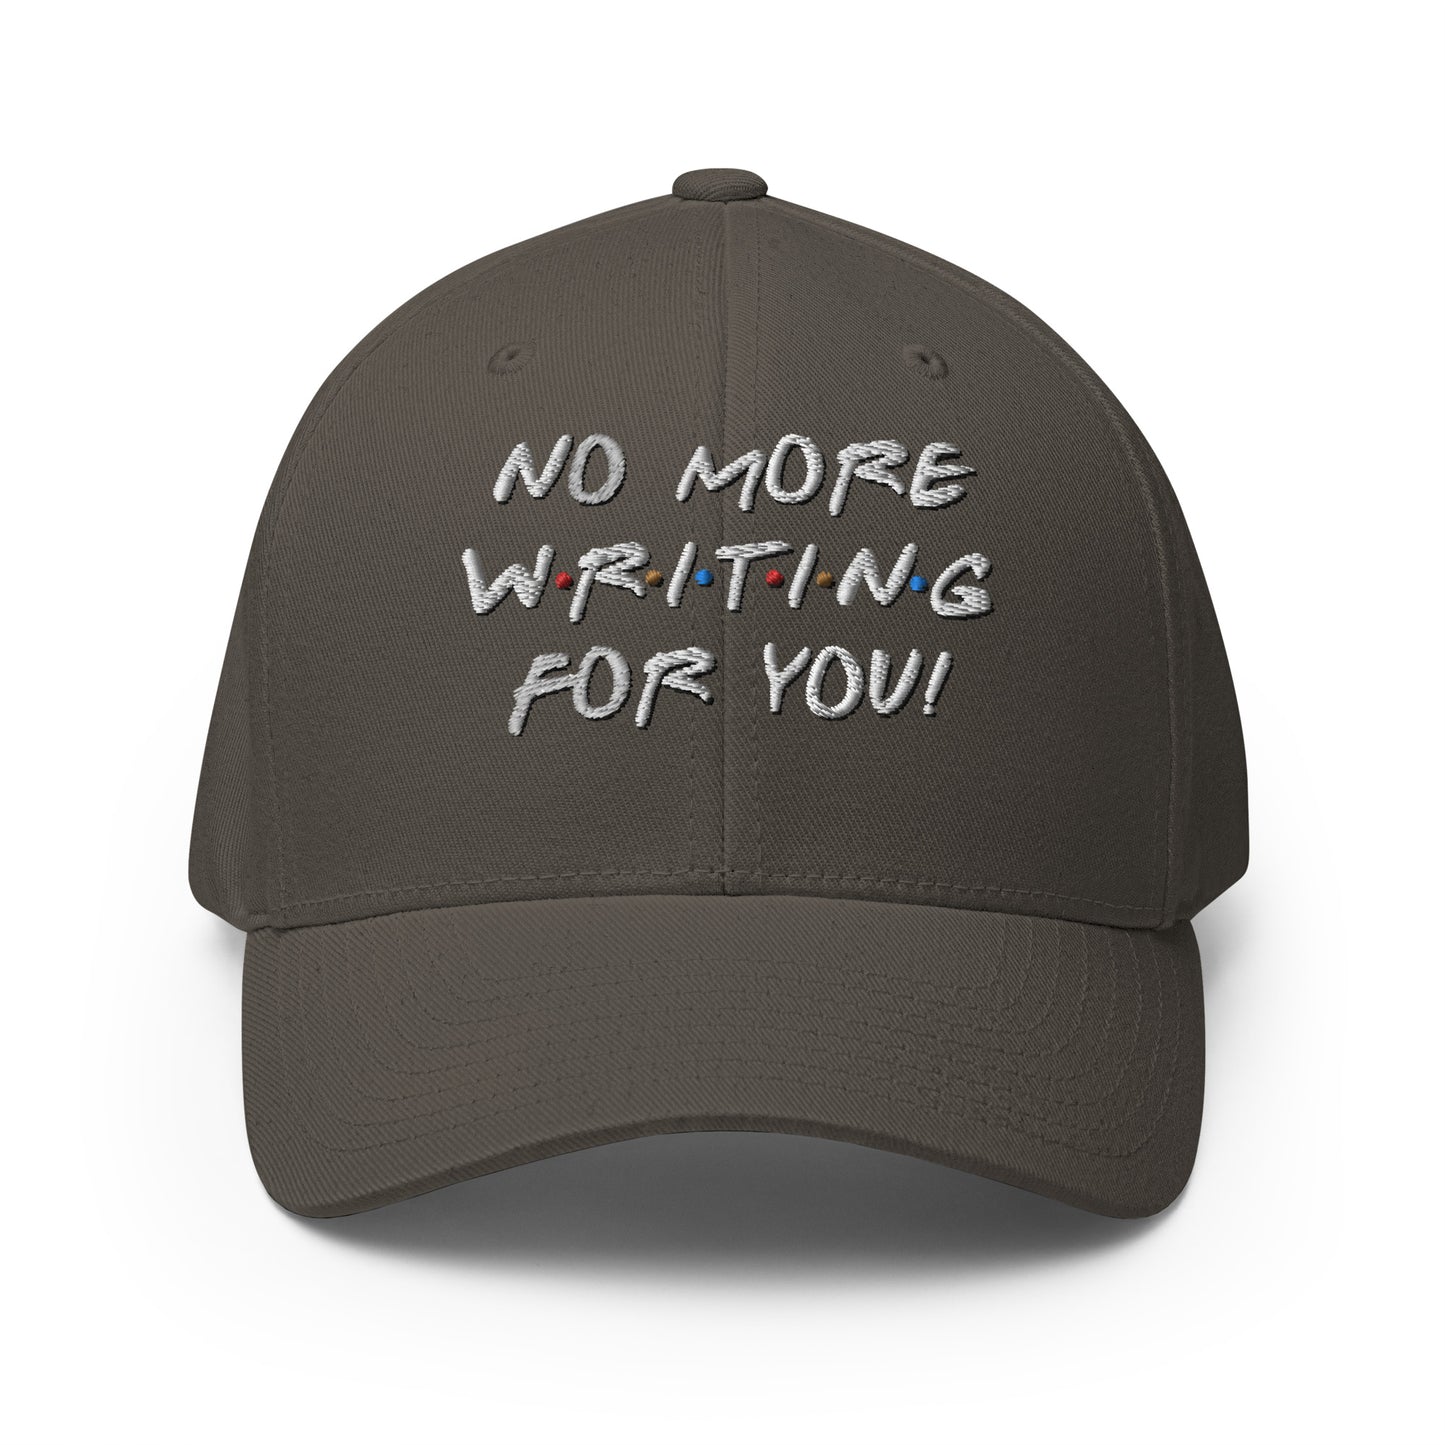 No More Writing for You! Flexfit Hat